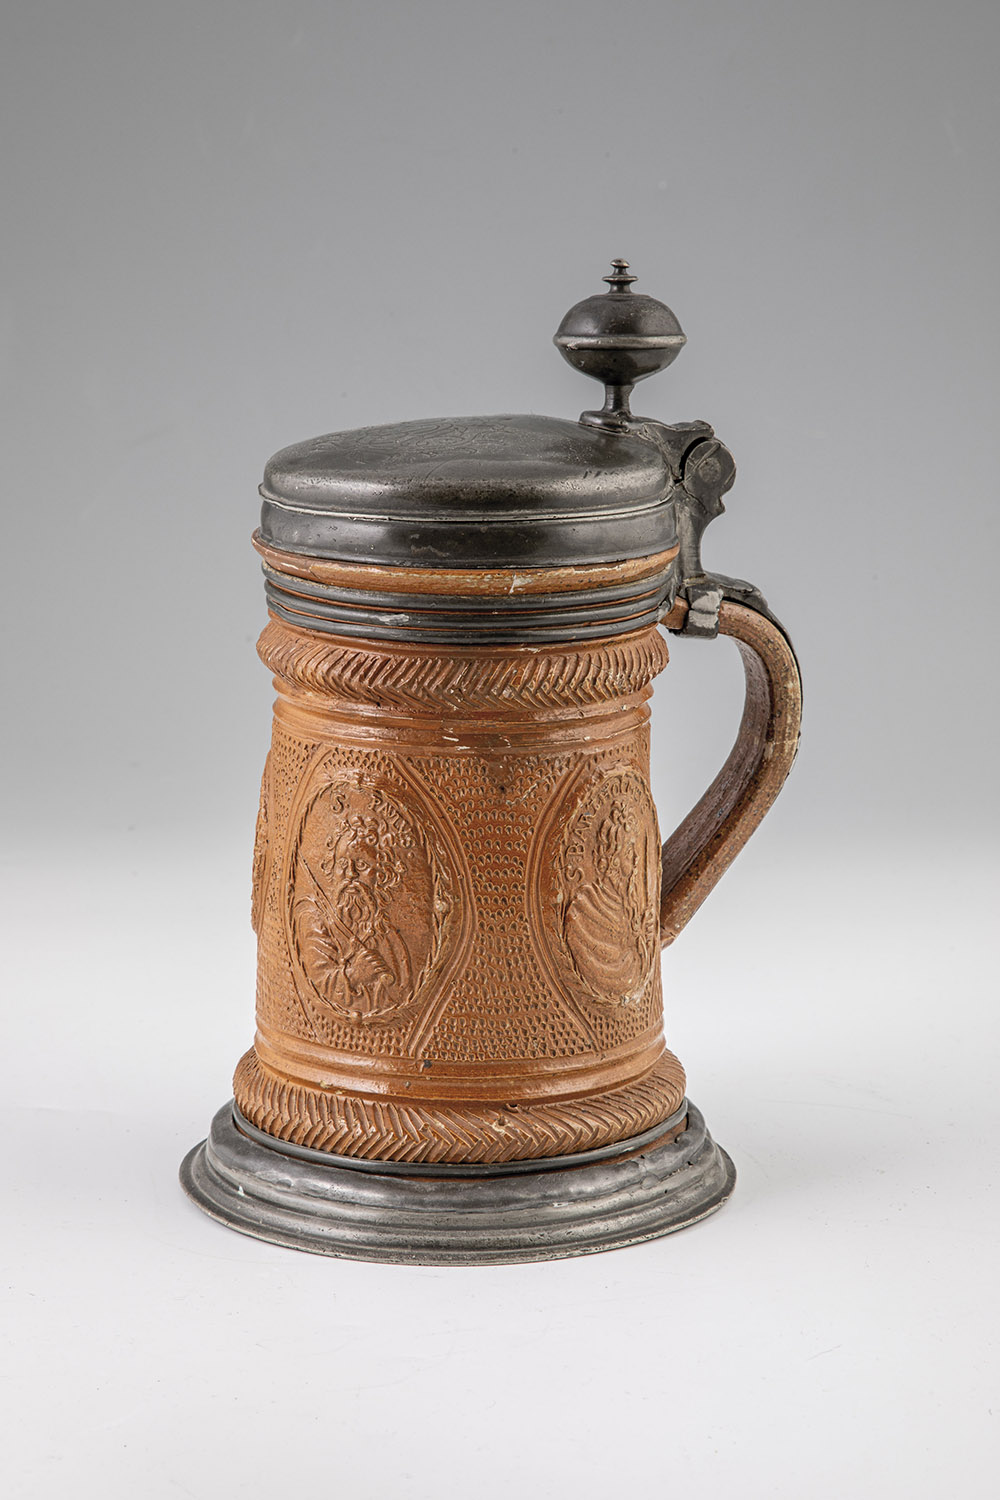 Roller pitcher with pewter mount - Image 3 of 3